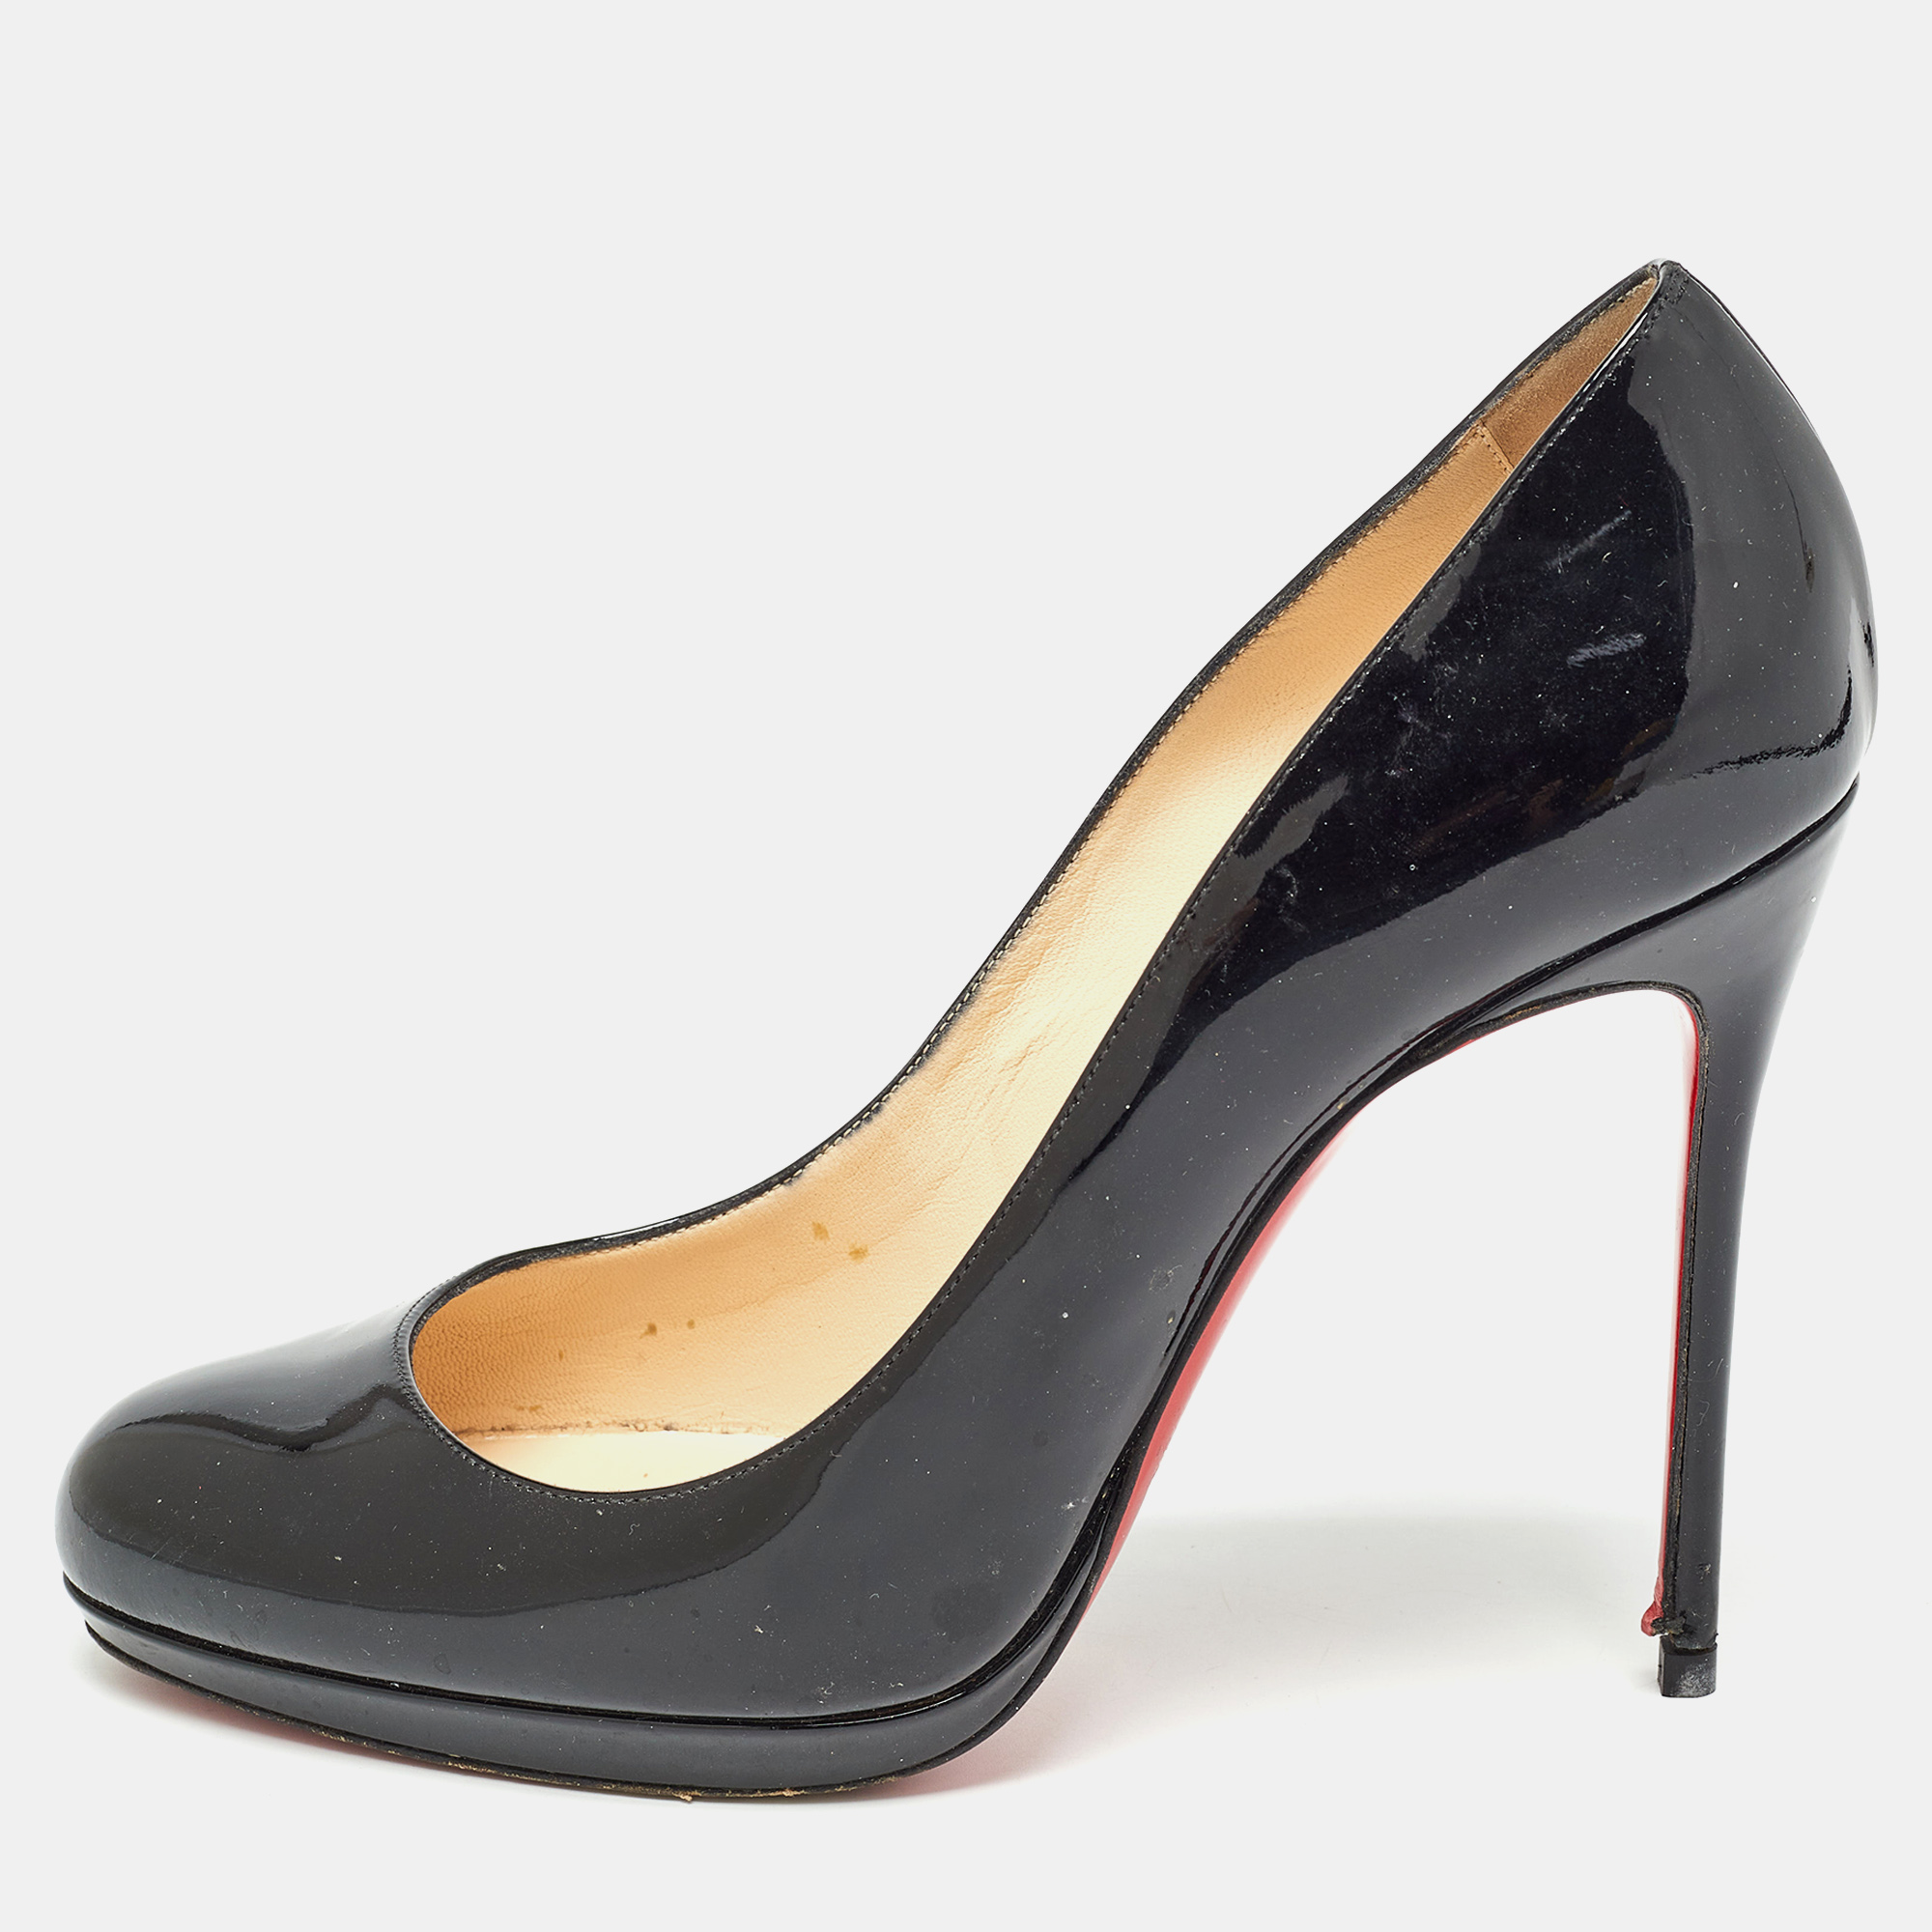 Pre-owned Christian Louboutin Black Patent New Simple Pumps Size 38.5